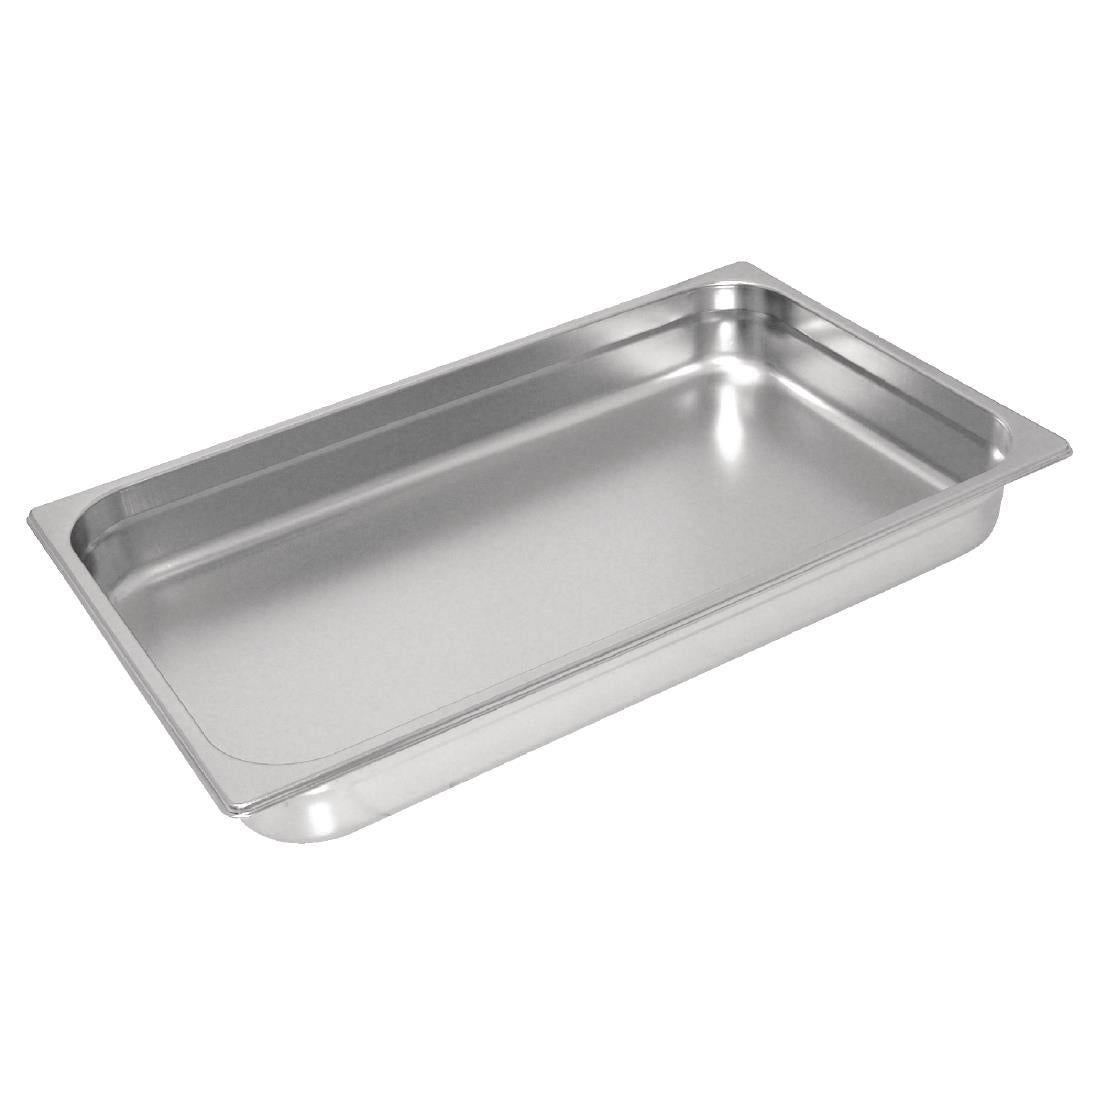 6 Pack of Stainless Steel Gastronorm Pan 1/1 150mm Deep